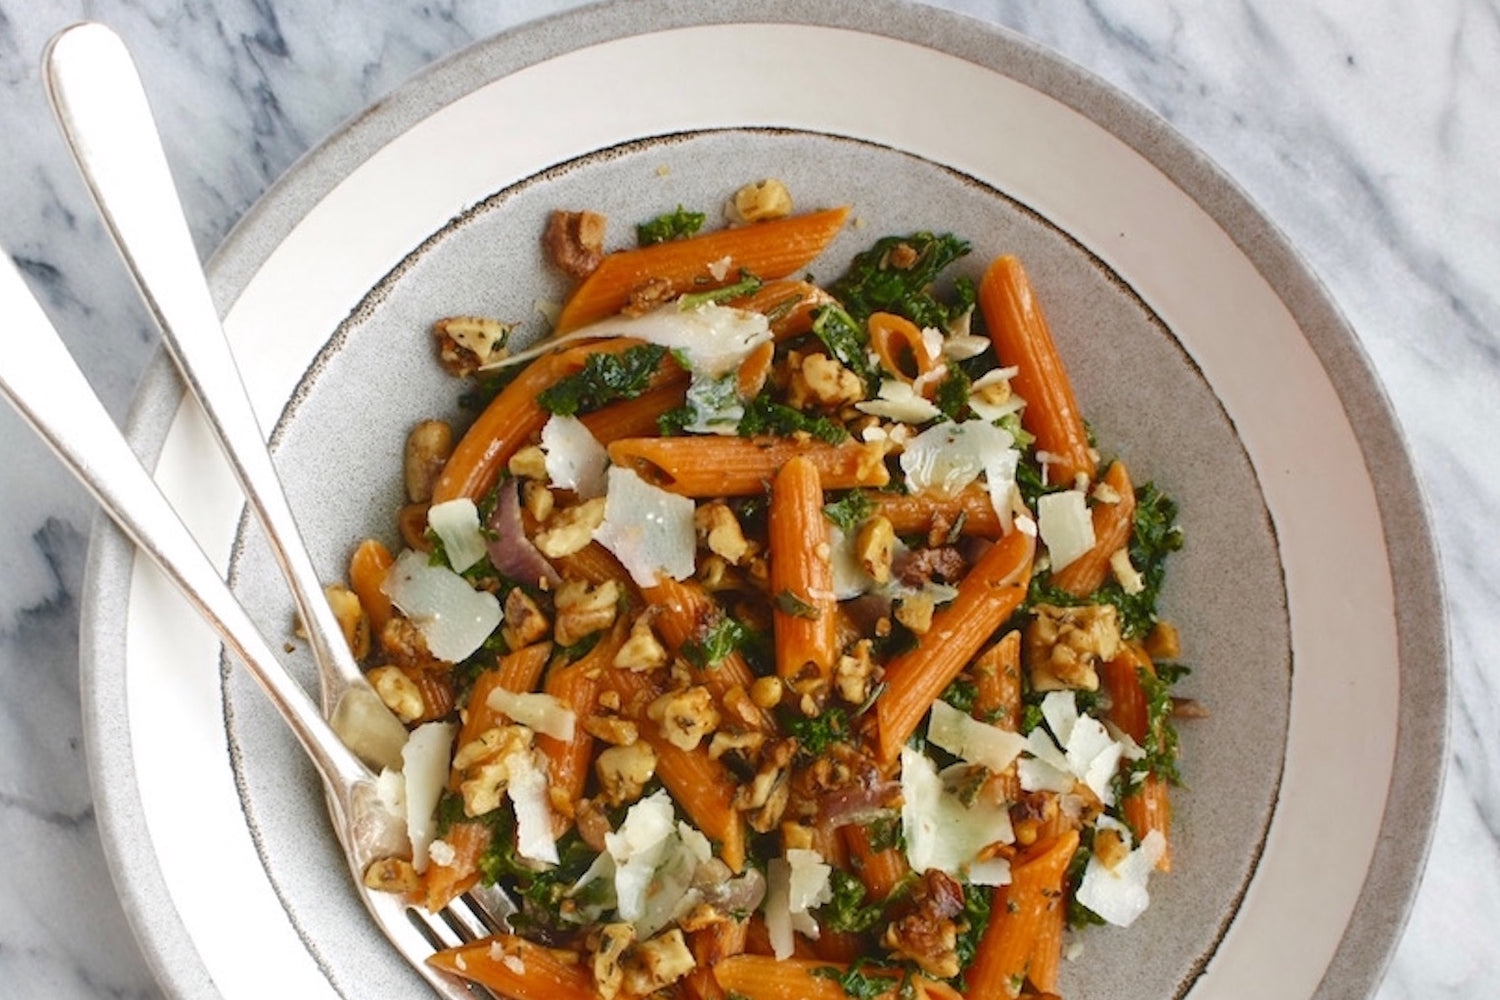 Penne with Garlic Kale & Toasted Walnuts